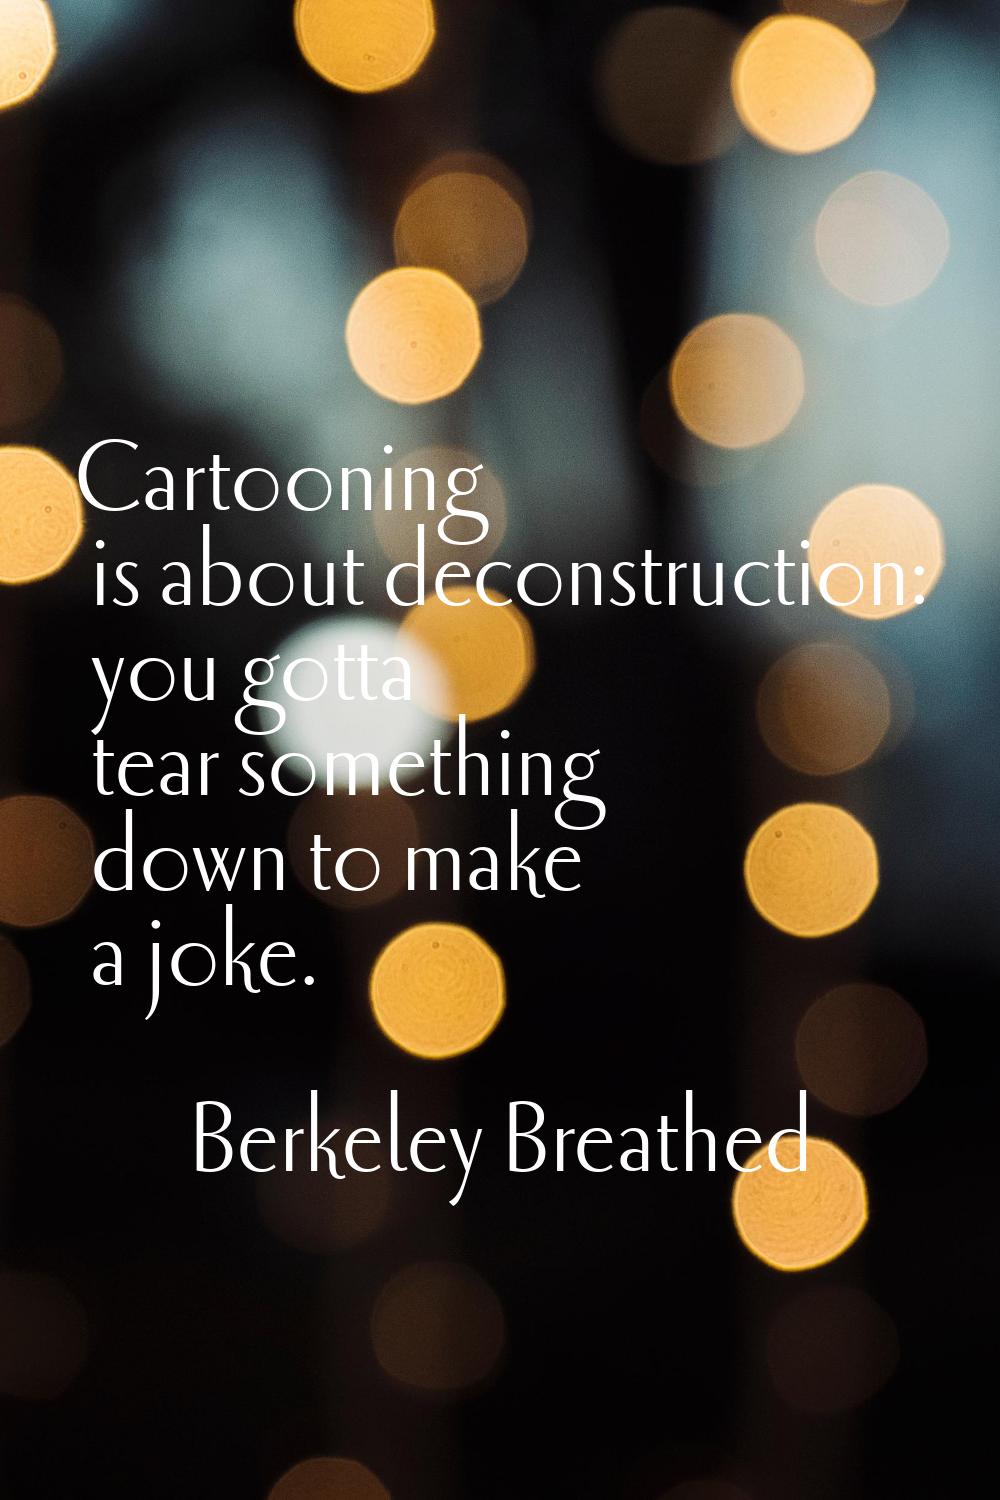 Cartooning is about deconstruction: you gotta tear something down to make a joke.